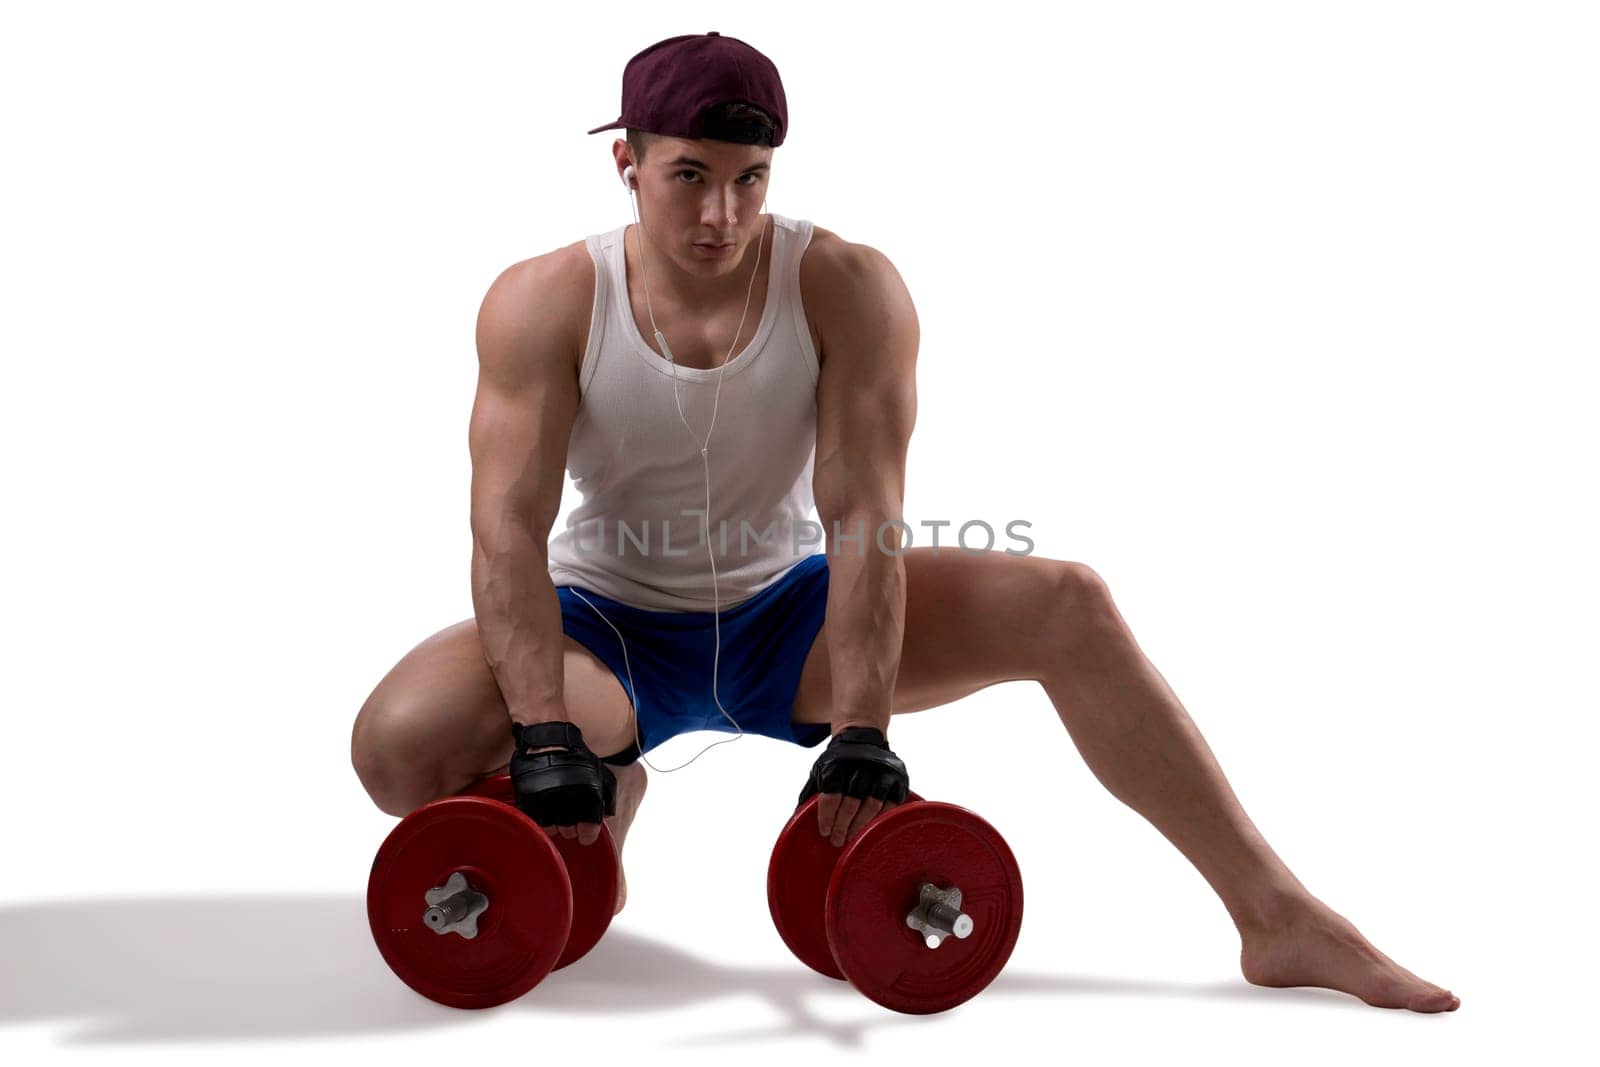 Handsome muscular shirtless young man with dumbbells by artofphoto